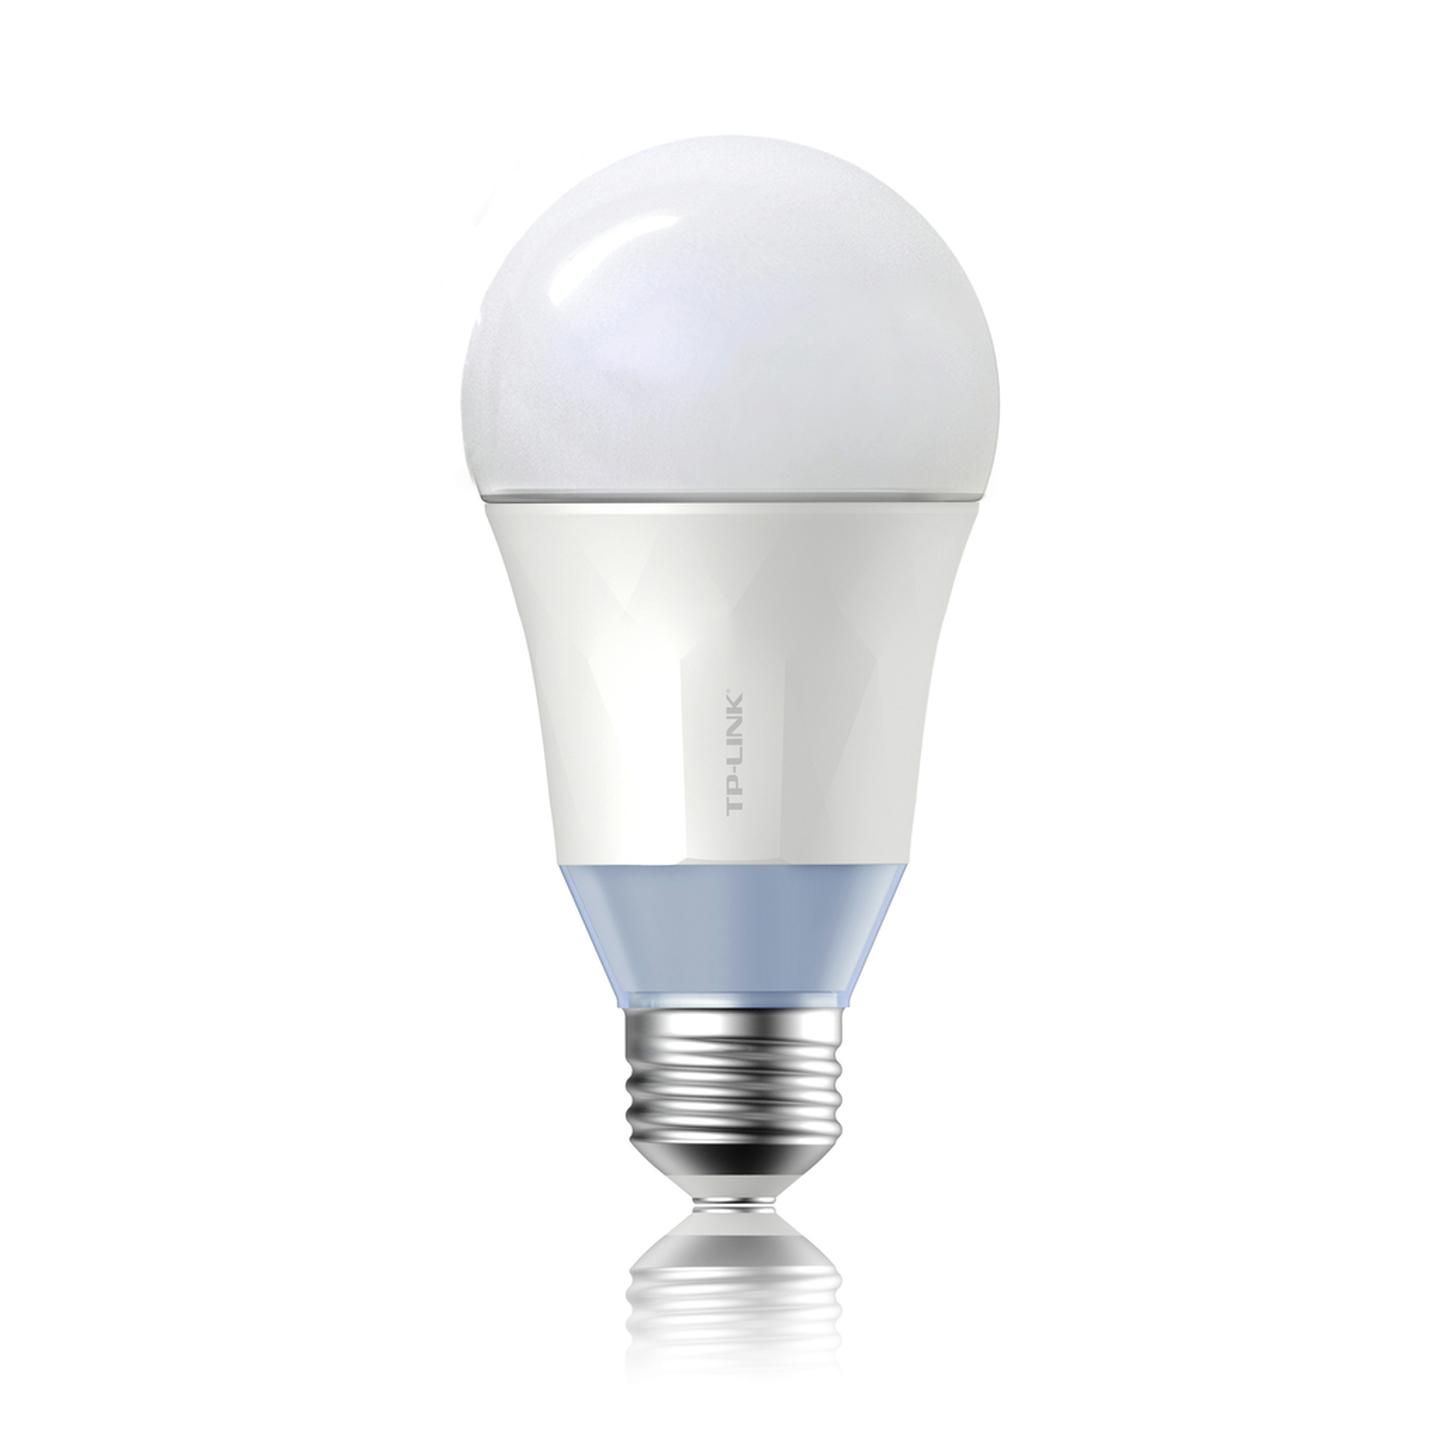 TP-Link Smart Wi-Fi LED Bulb with Tuneable white